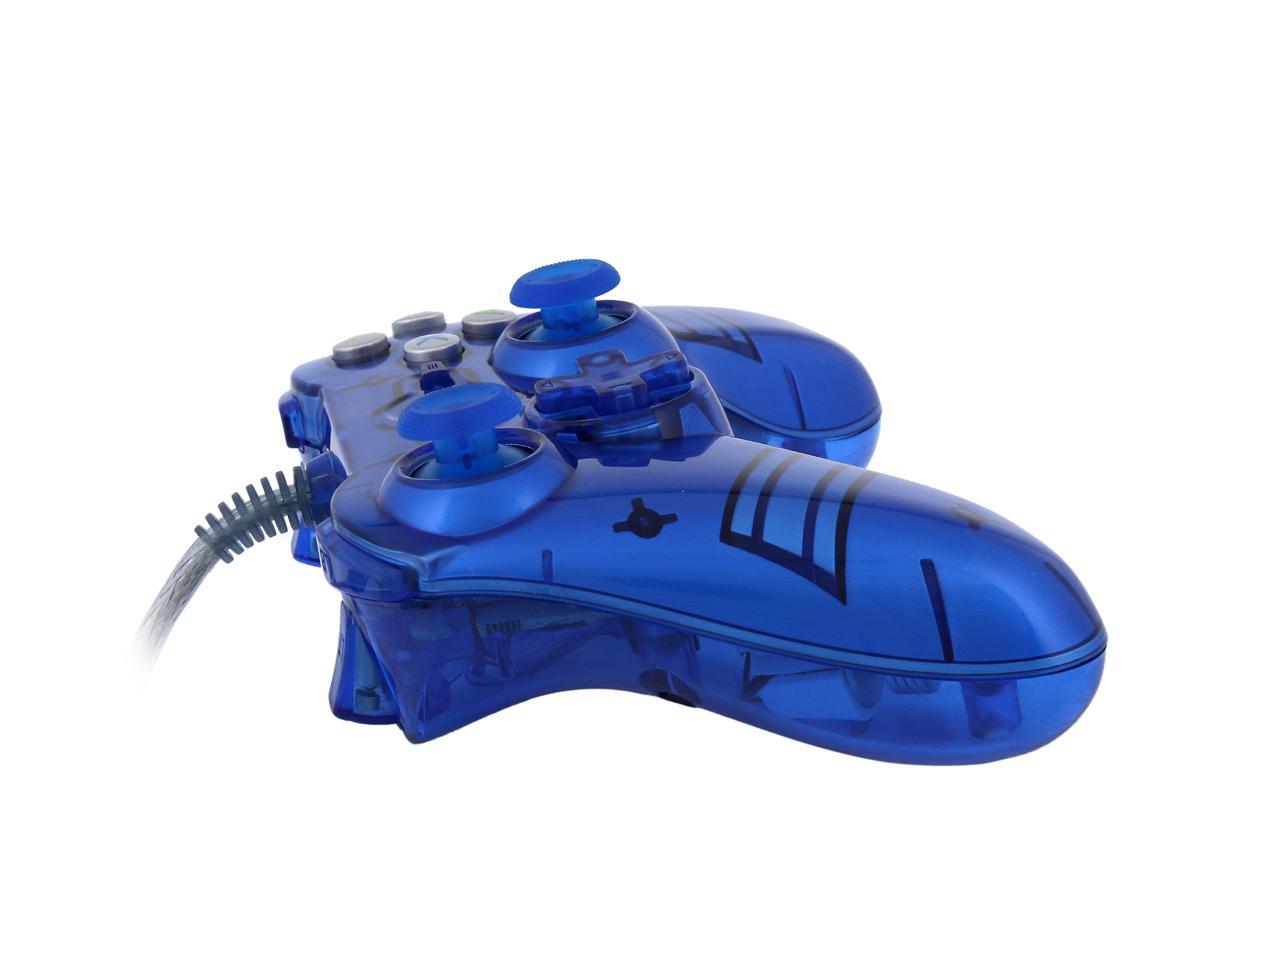 wired xbox one liquid metal controller windows 7